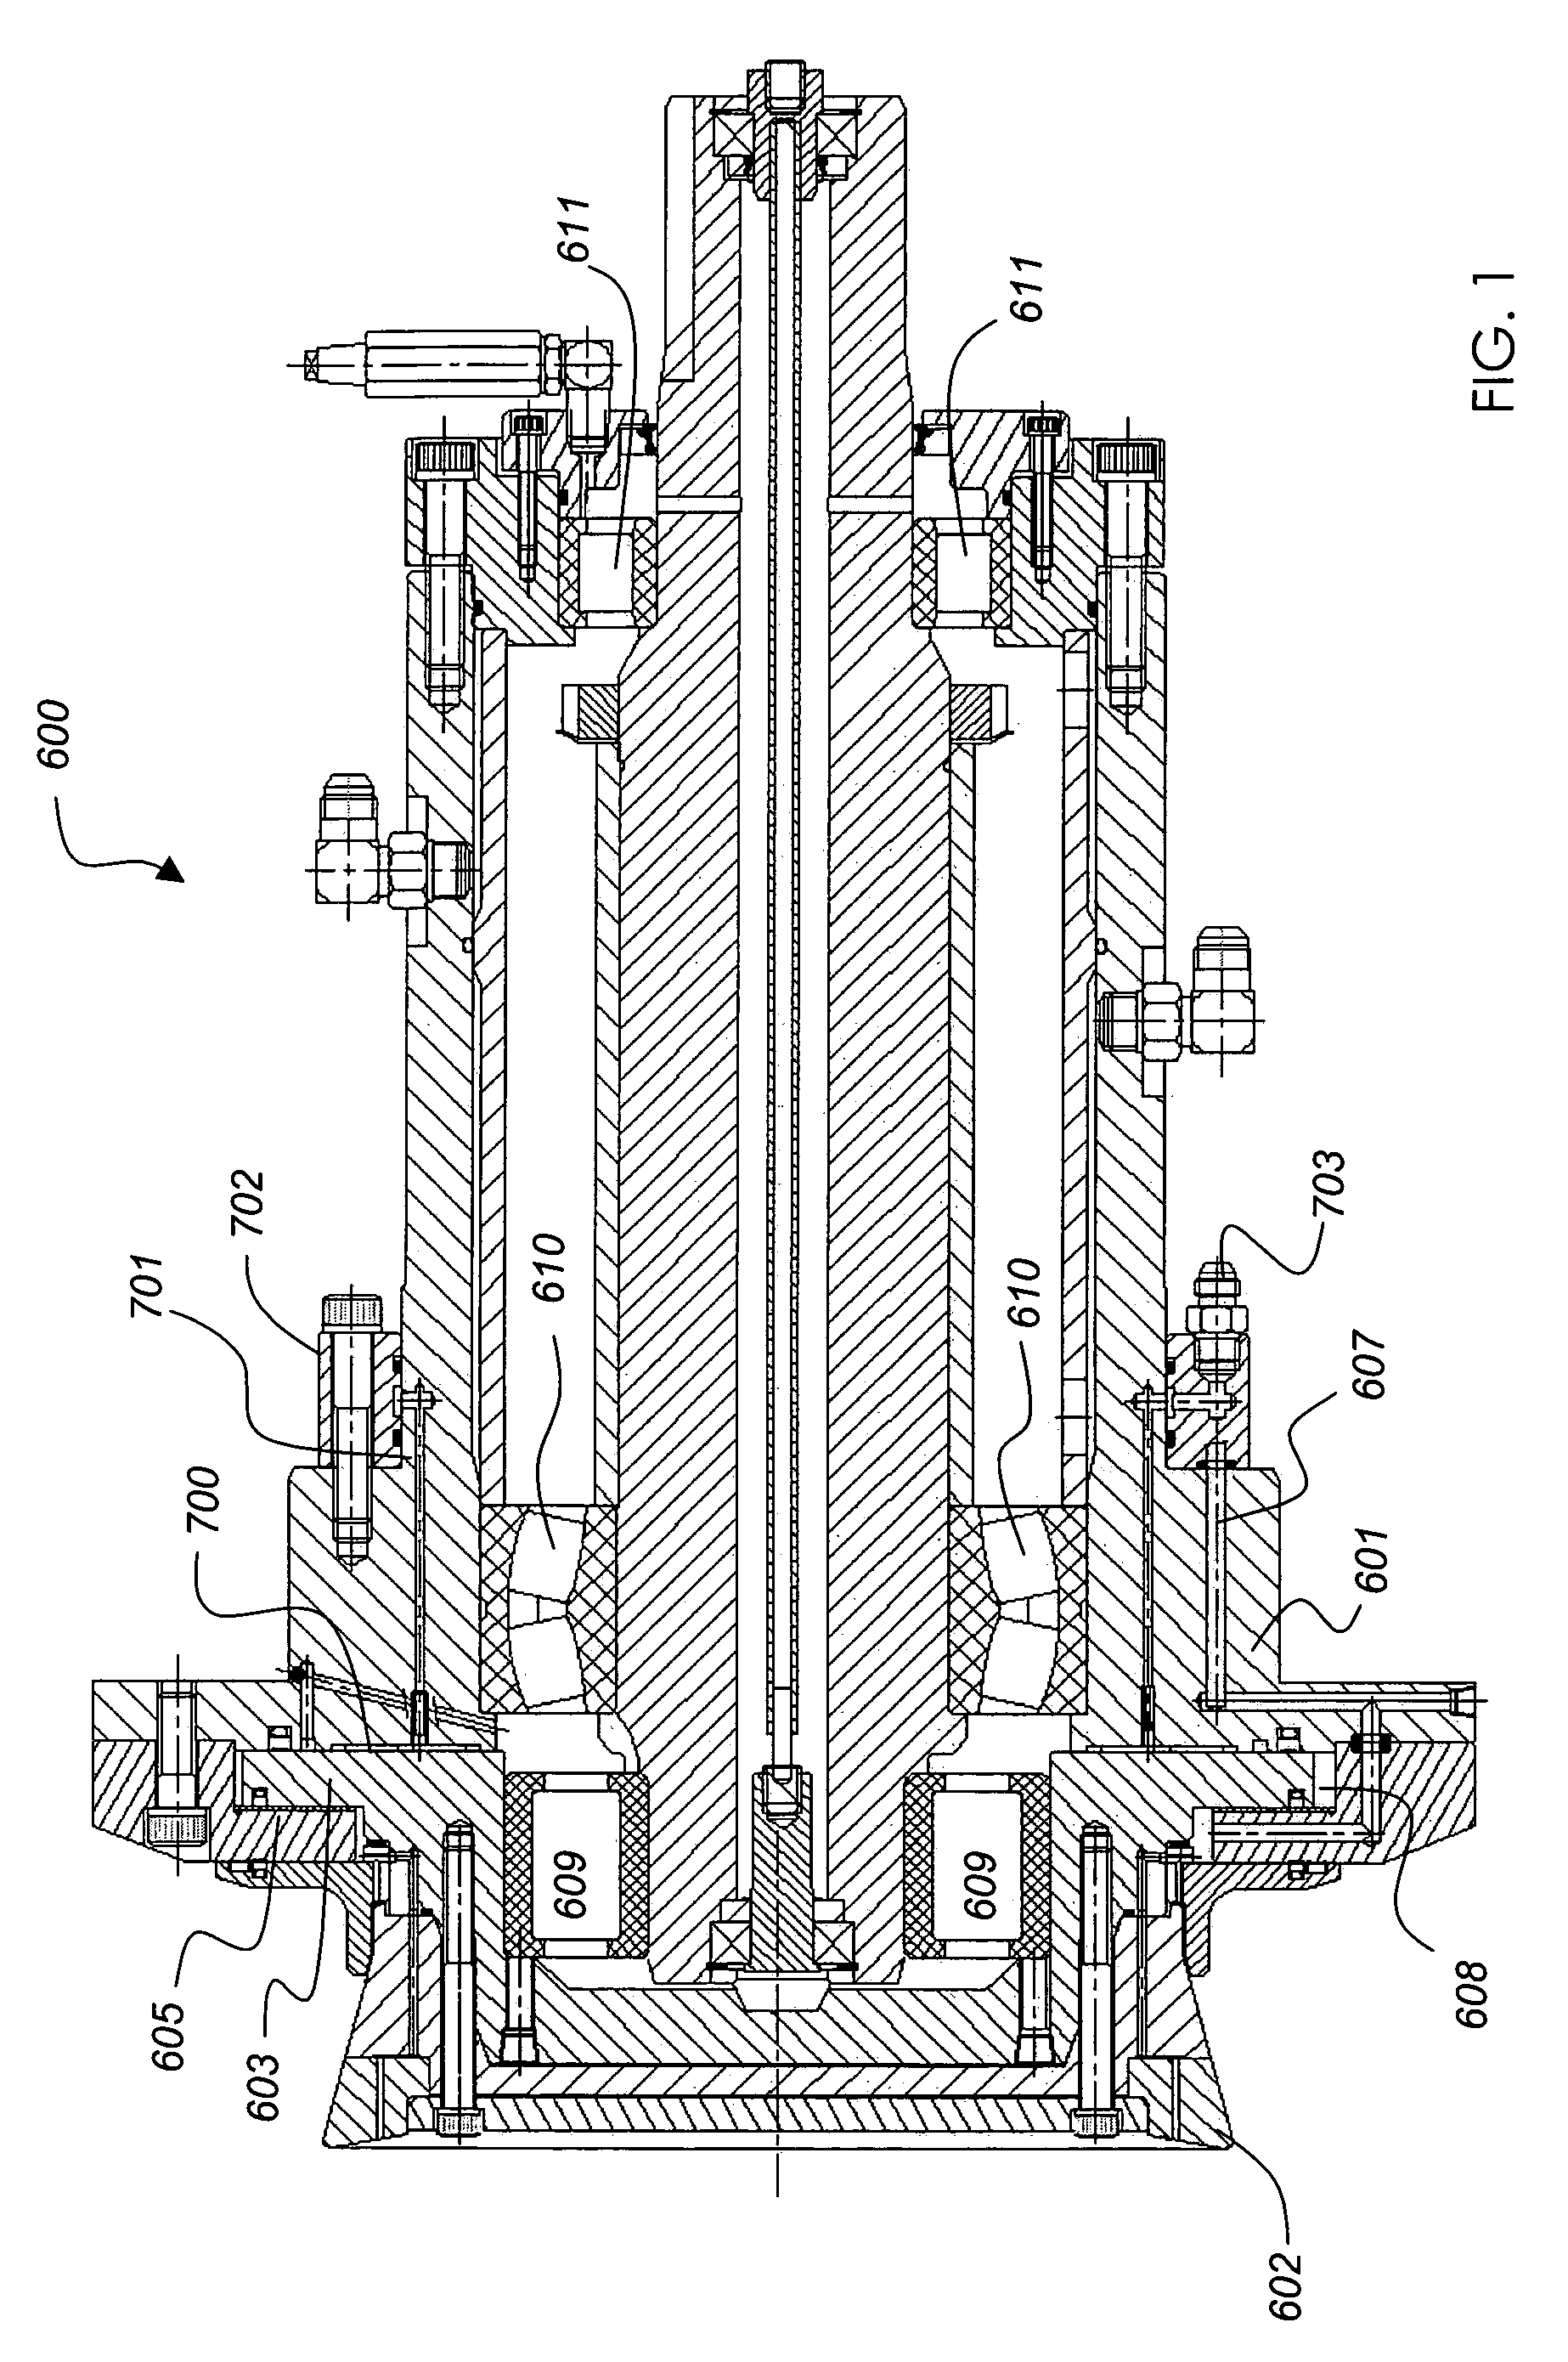 Oscillating disc cutter with speed controlling bearings